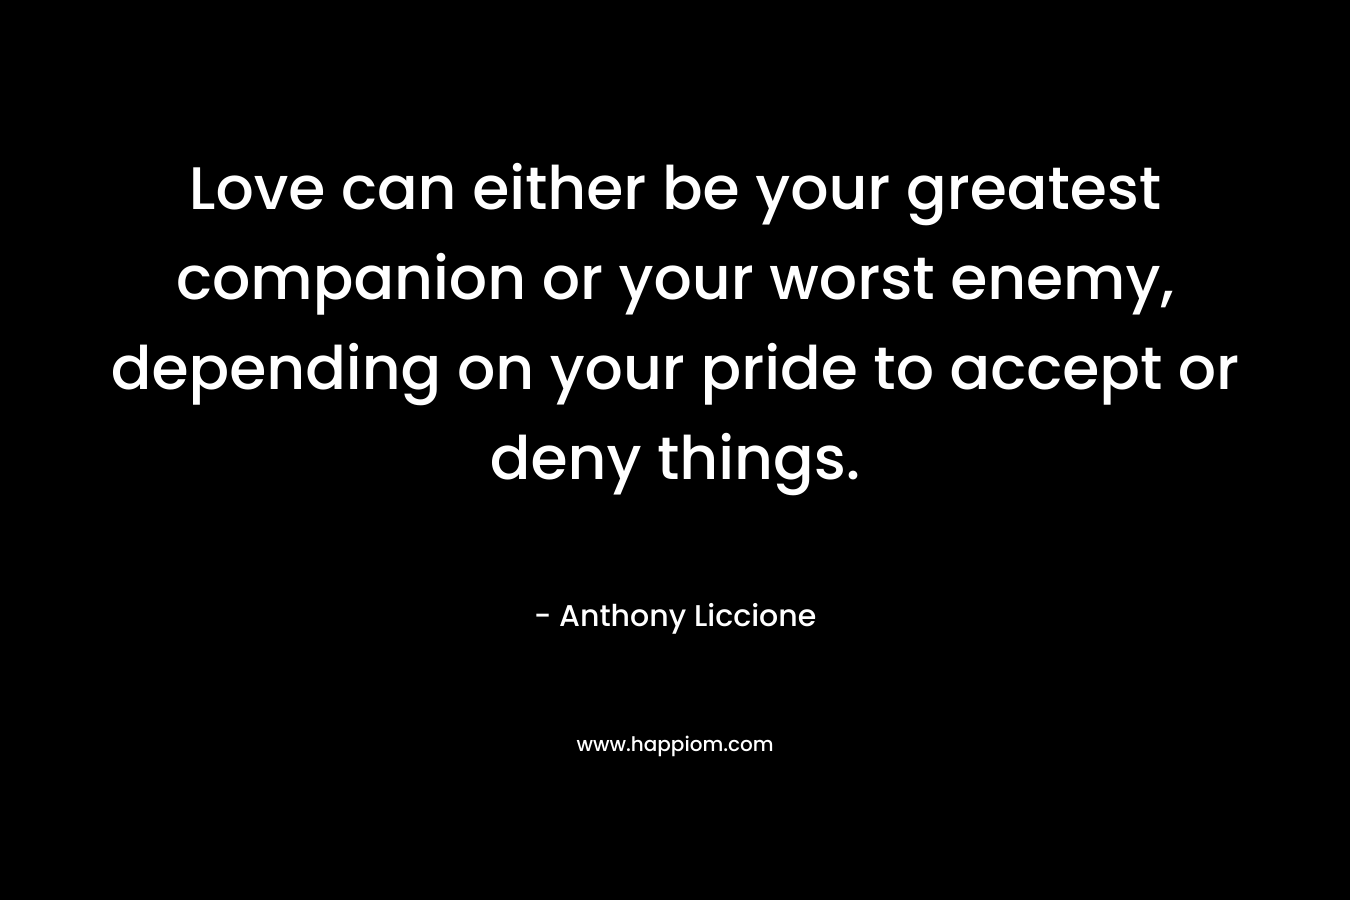 Love can either be your greatest companion or your worst enemy, depending on your pride to accept or deny things. – Anthony Liccione